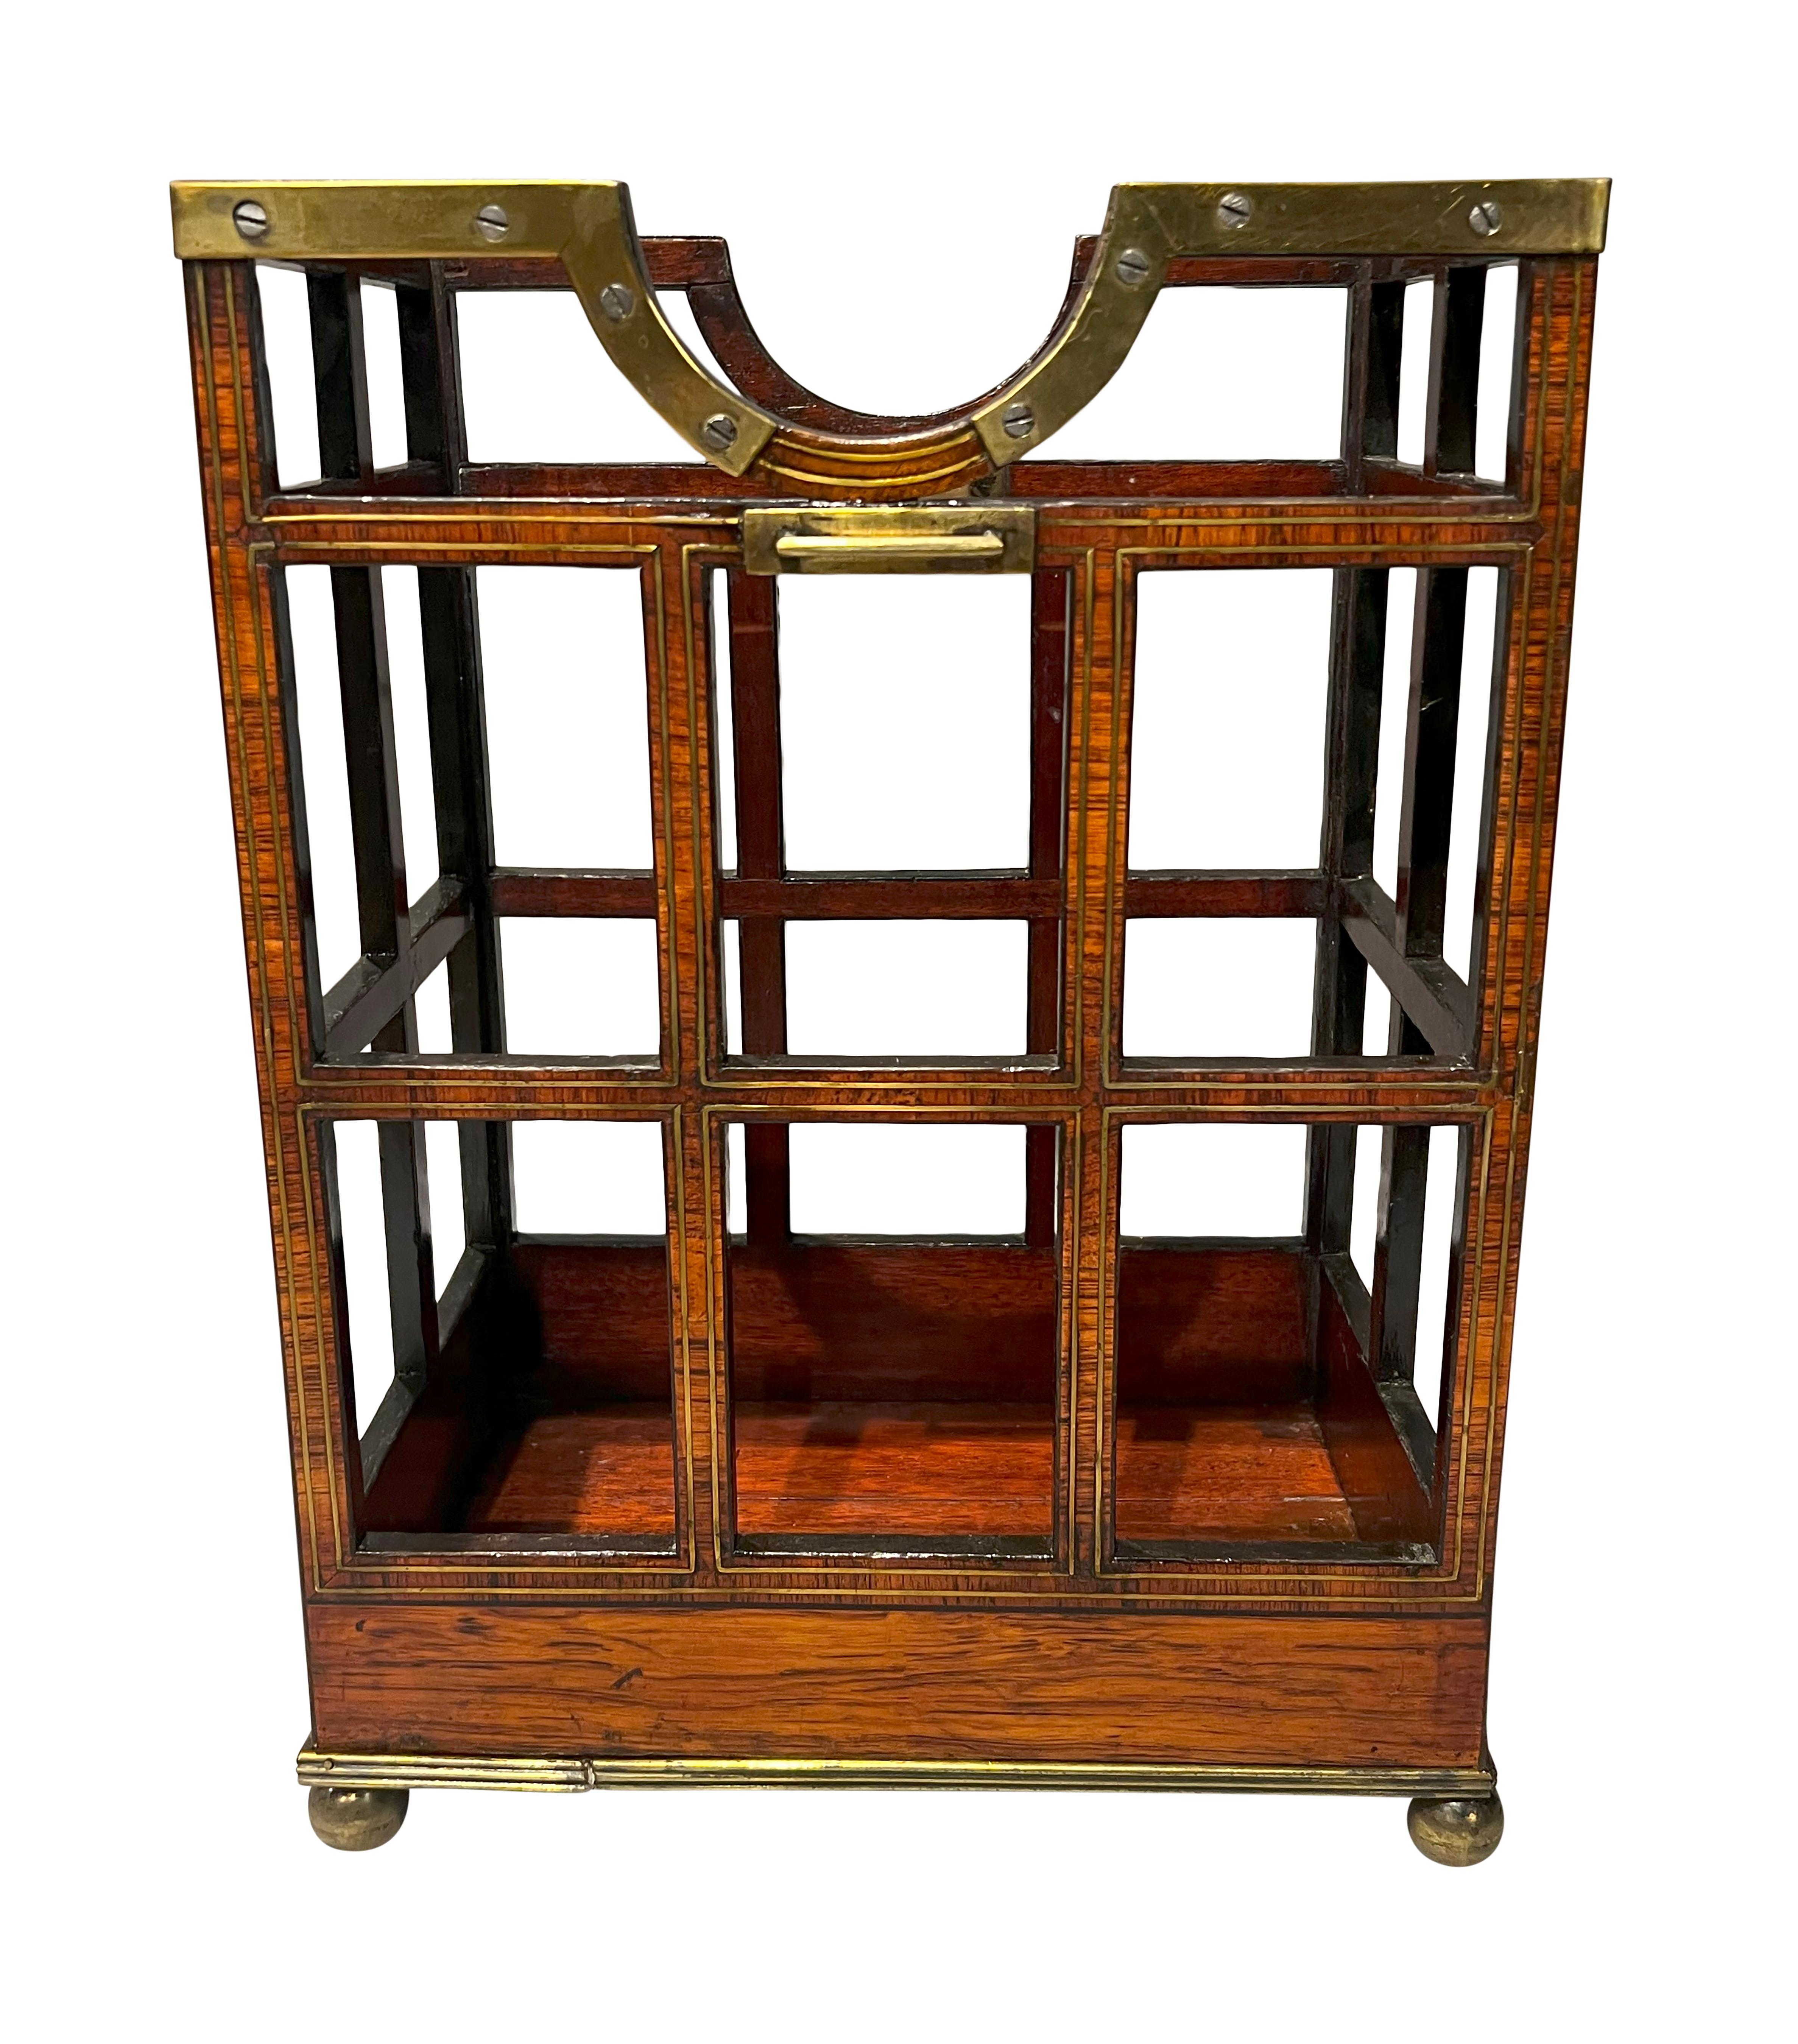 19th Century Unusual Regency Rosewood And Brass Inlaid Bottle Caddy For Sale